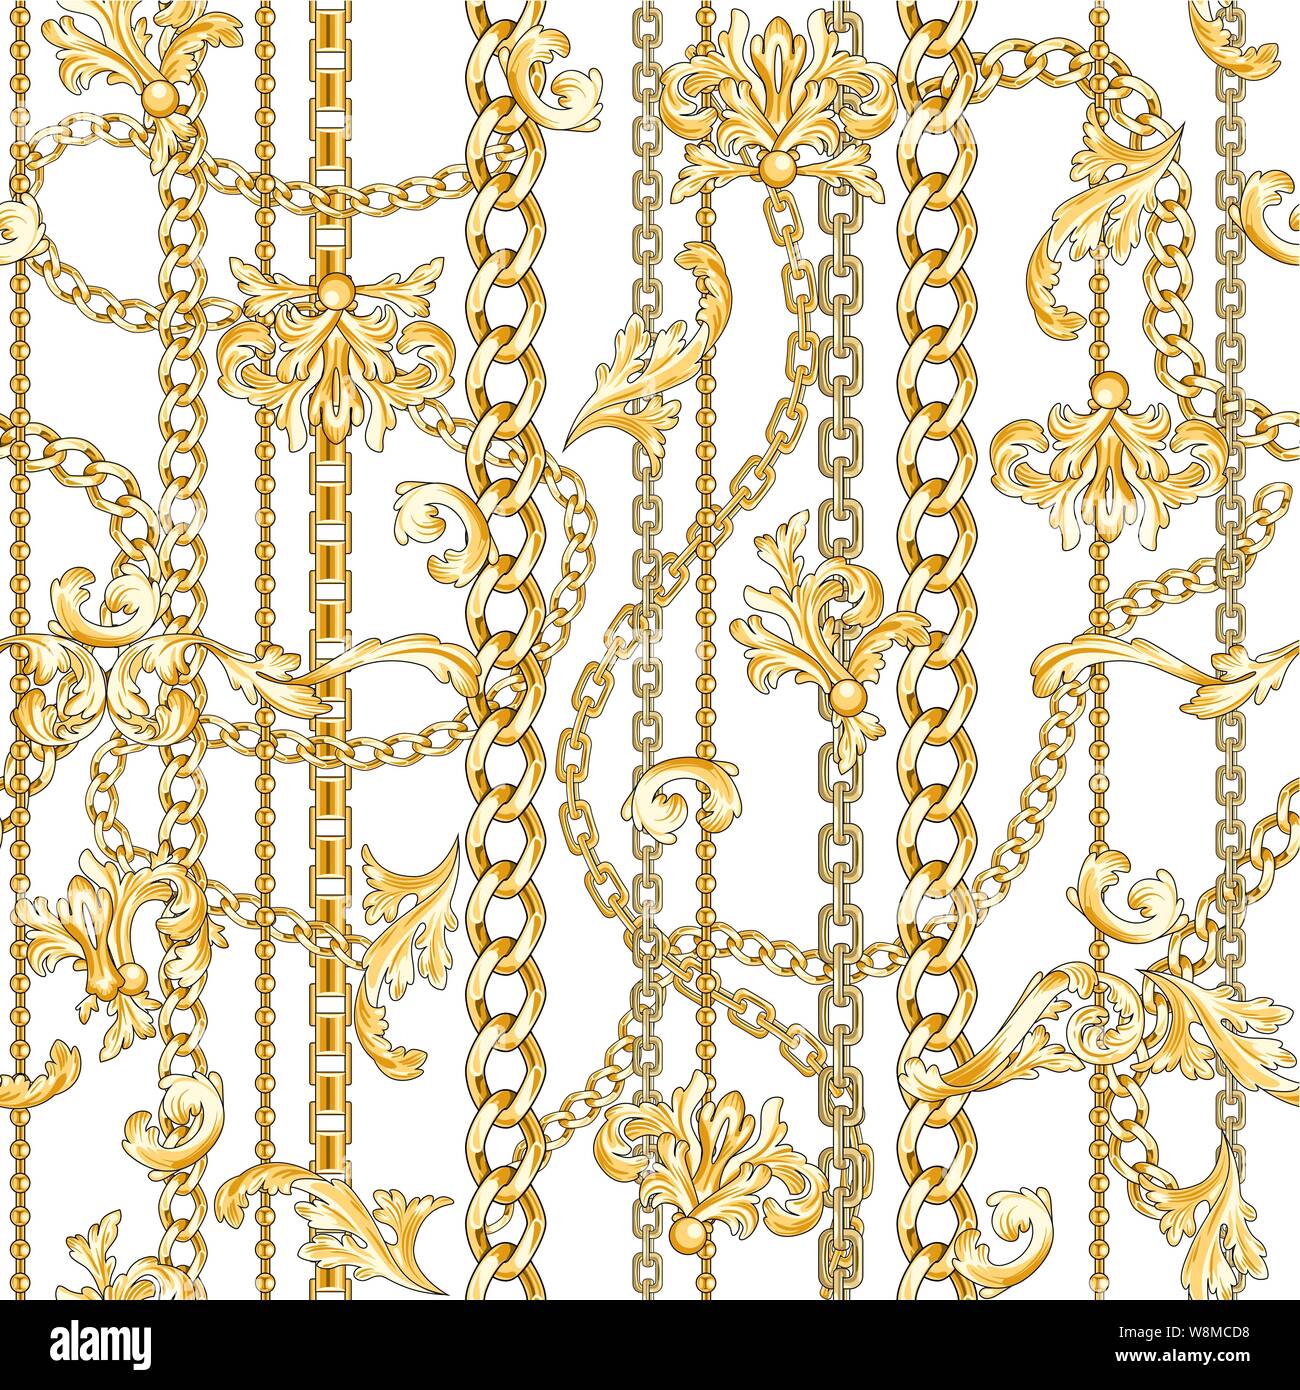 baroque flourishes and chains Stock Vector